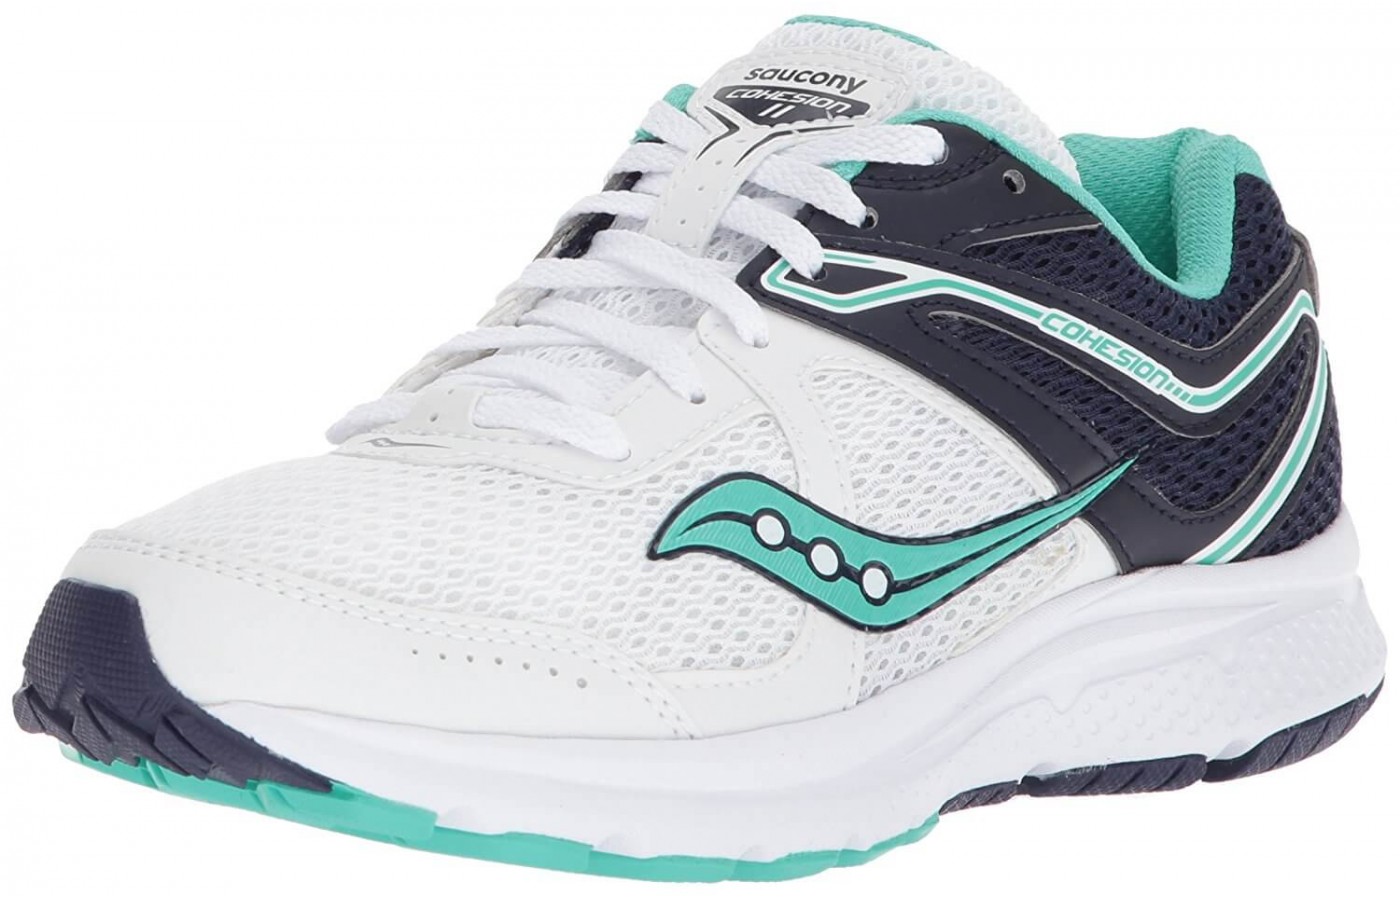 The Saucony Cohesion 11 in a white, navy, and teal colorway